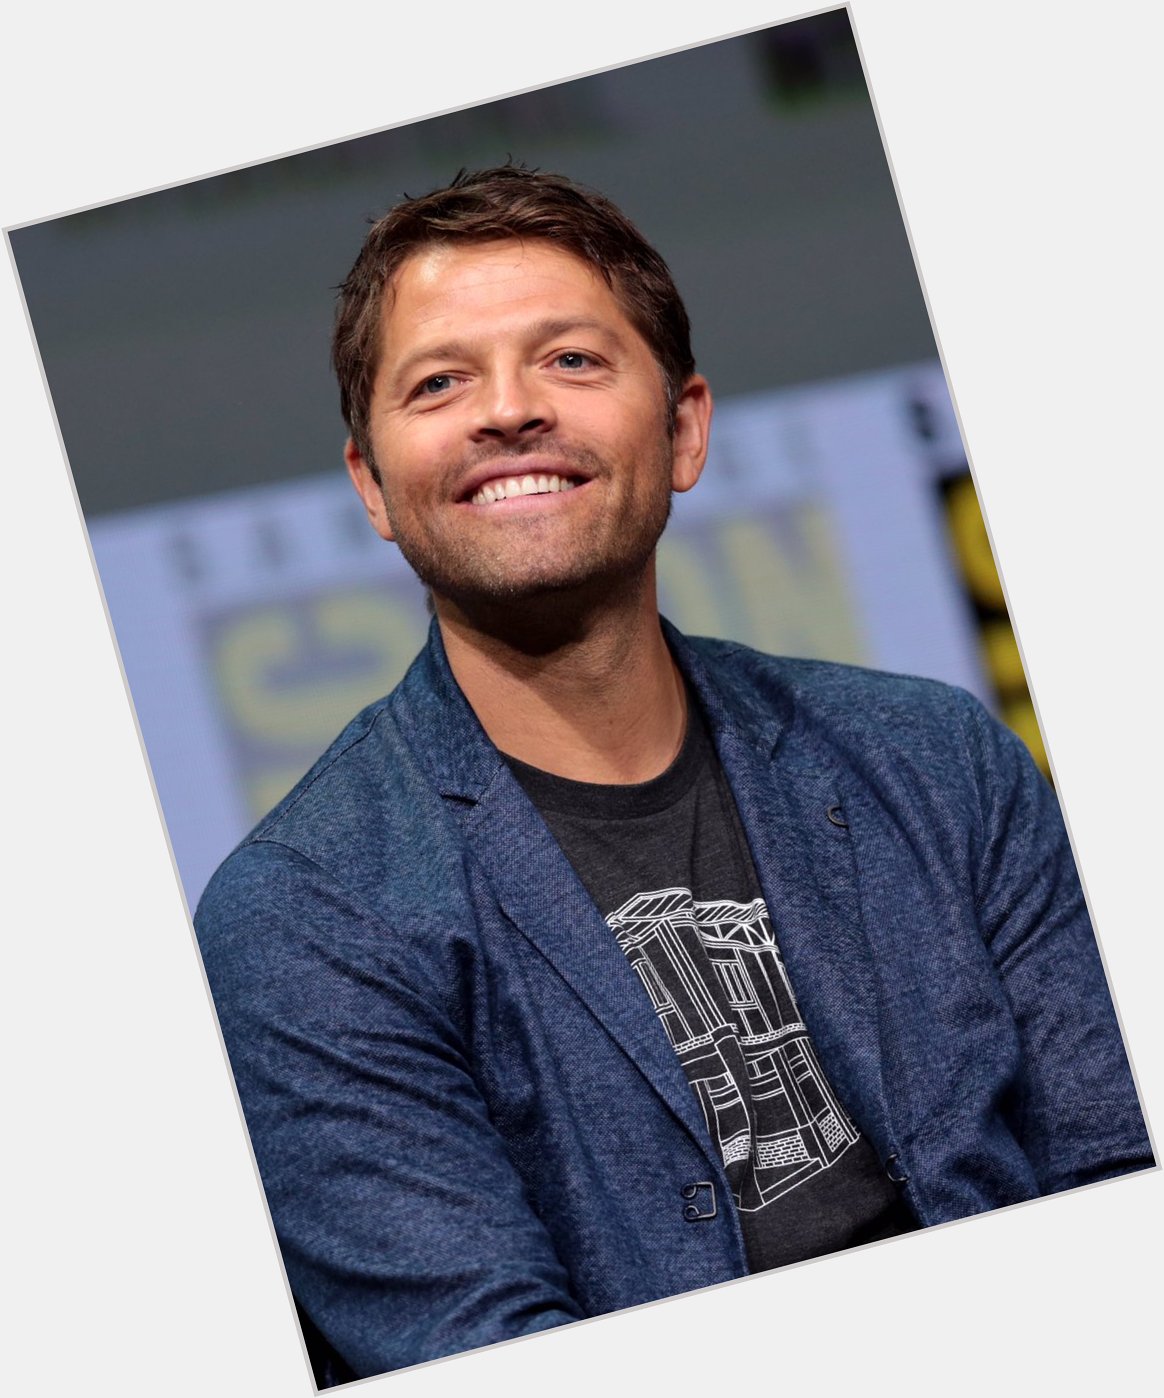 Happy birthday to Misha Collins.

The best bean on the planet!!!

Boop! 